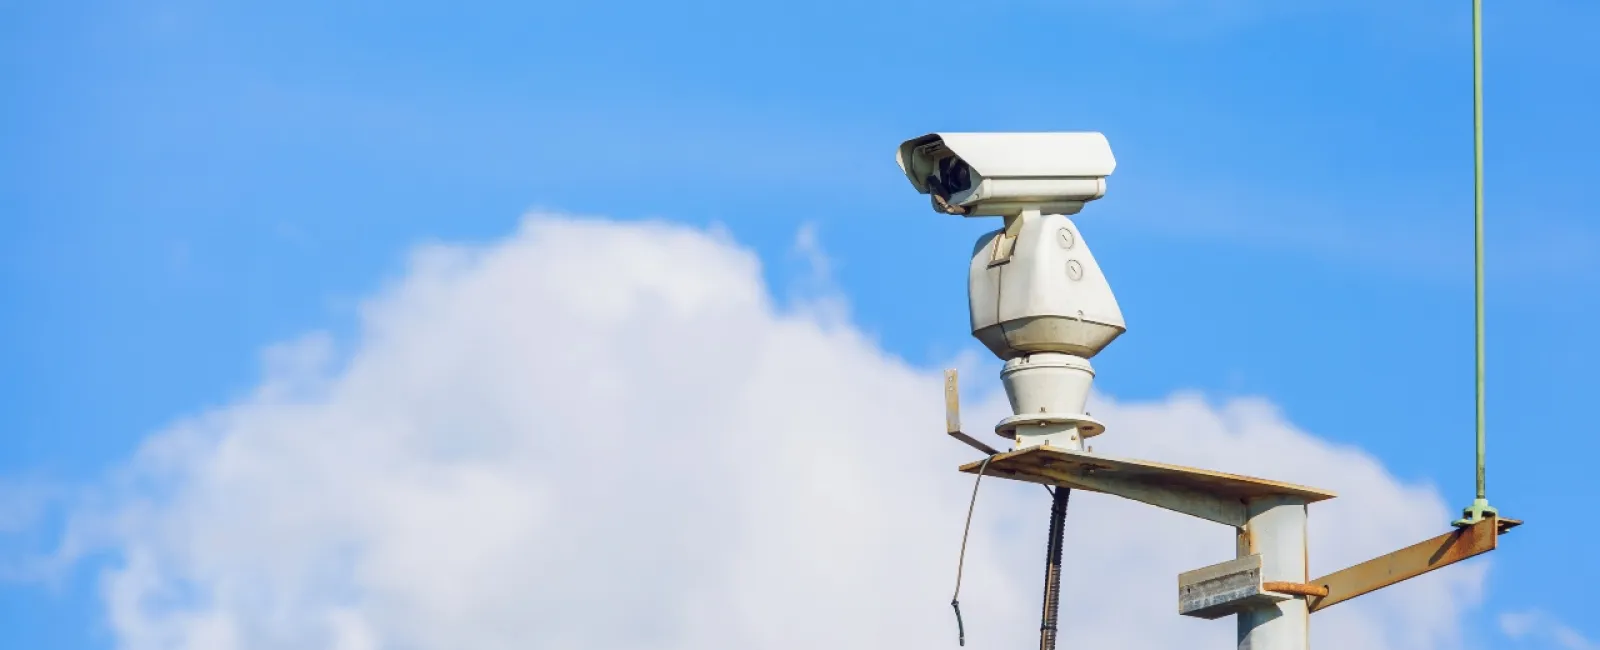 NVR vs Cloud Surveillance: Which One Is Right For Your Business?